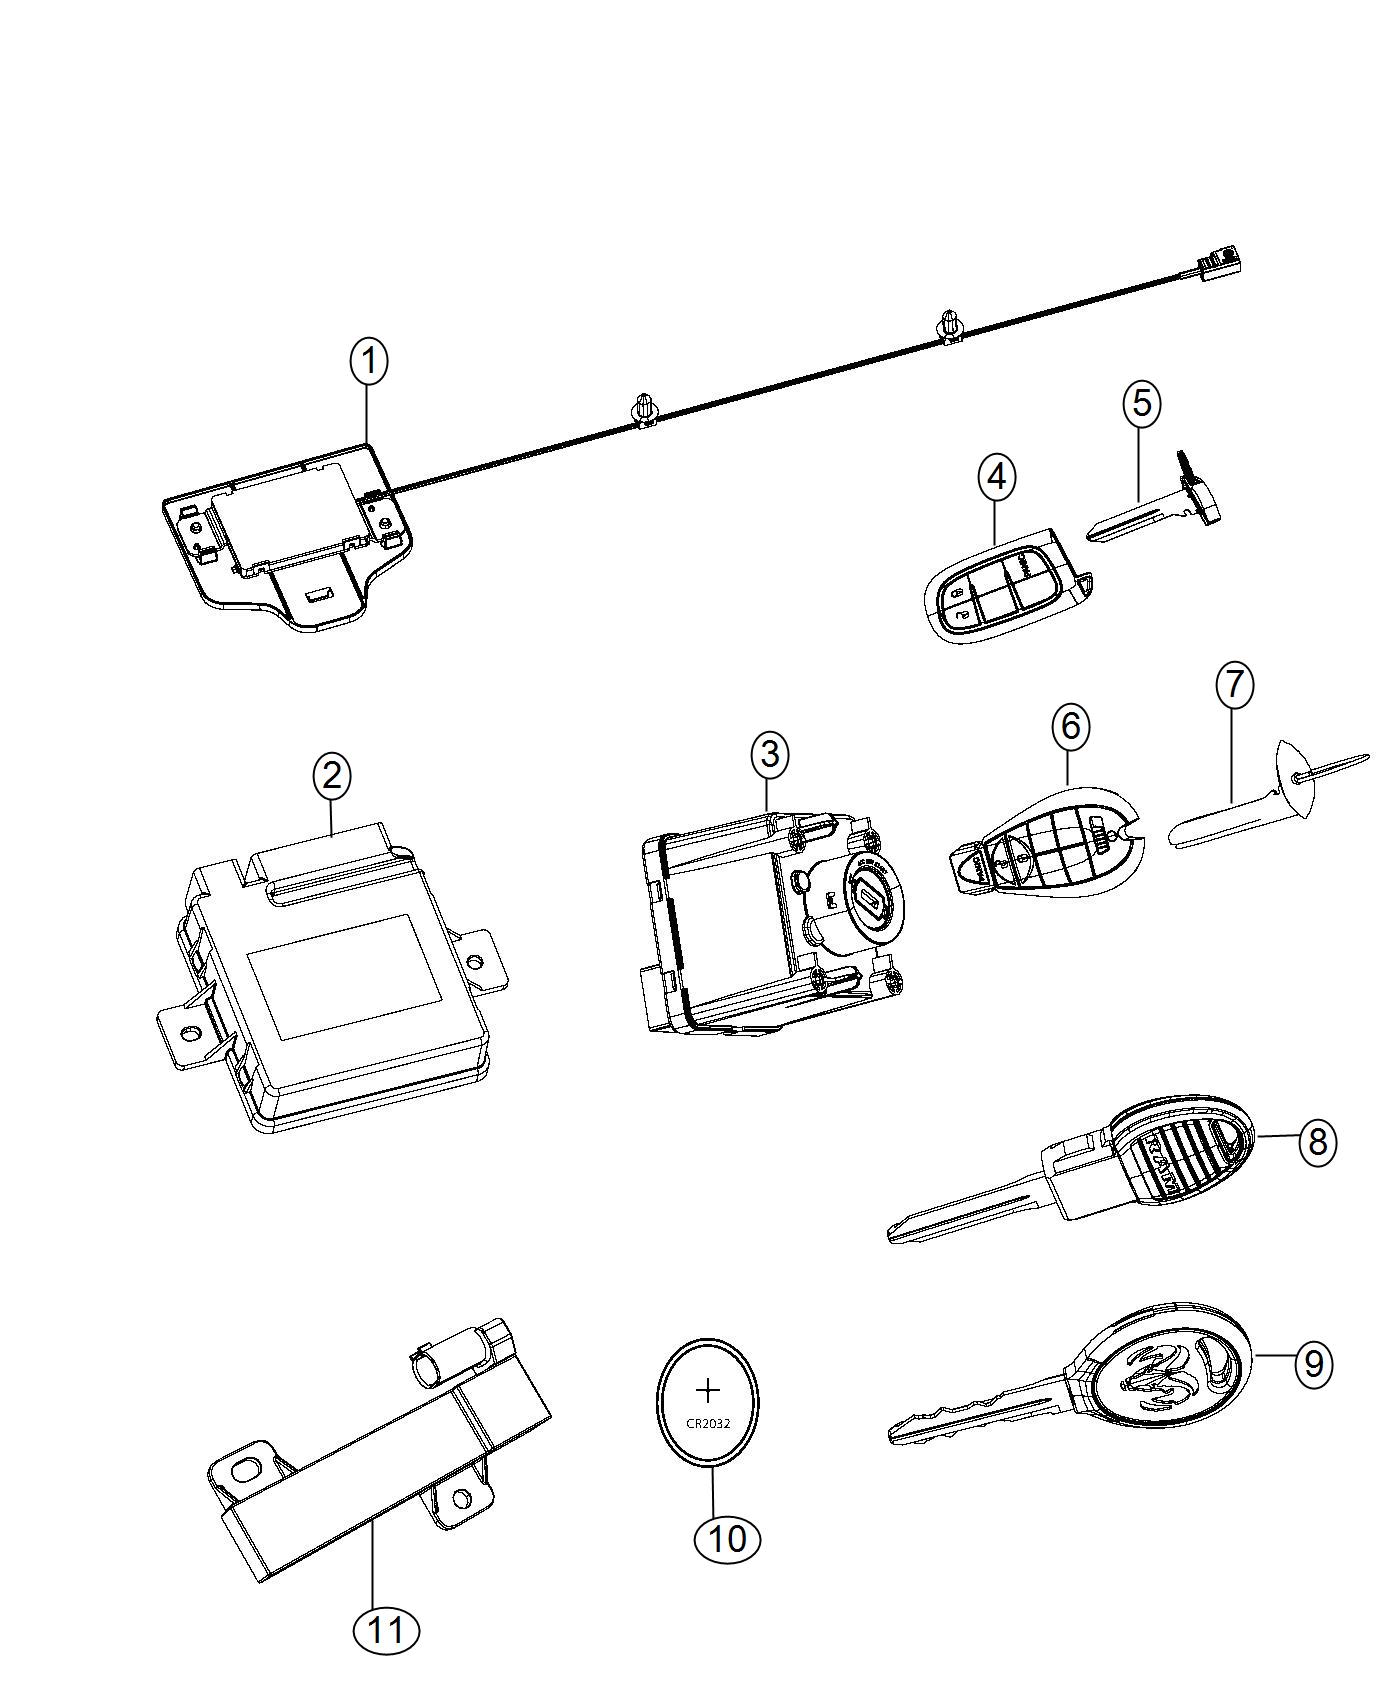 Modules, Receivers, Keys, and Key FOBs. Diagram